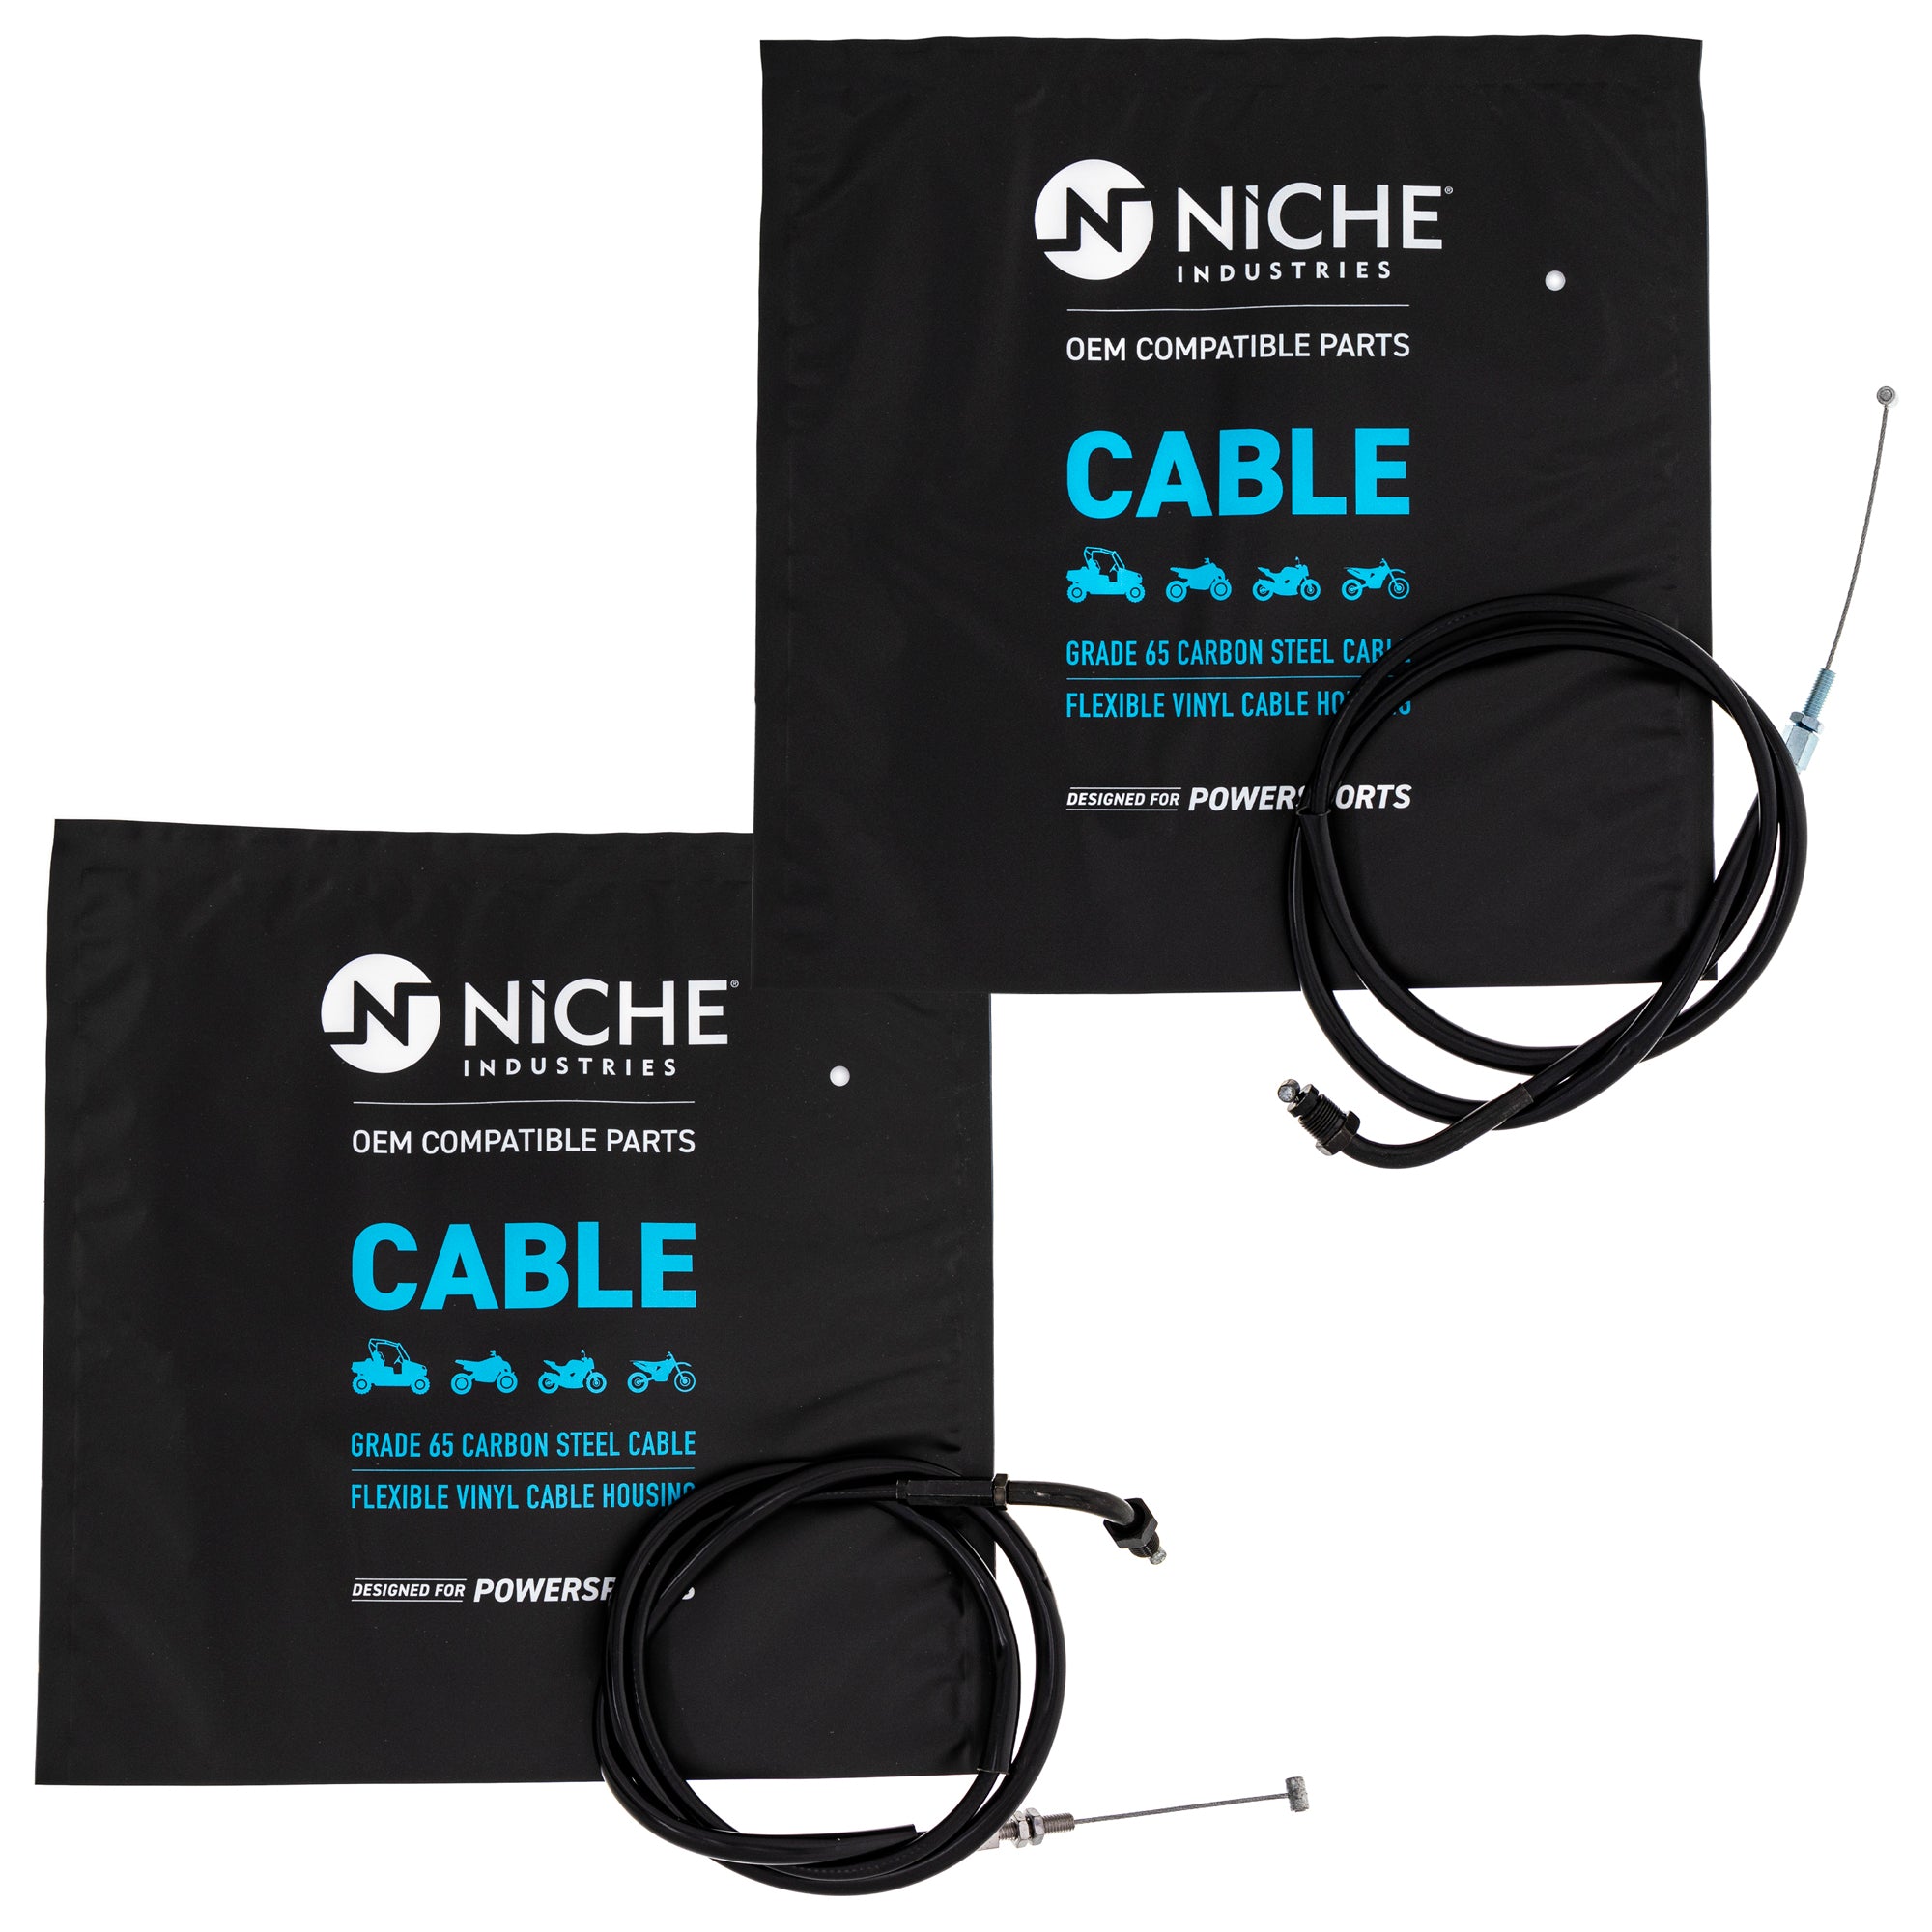 NICHE MK1005841 Throttle Cable Set for zOTHER Super Nighthawk